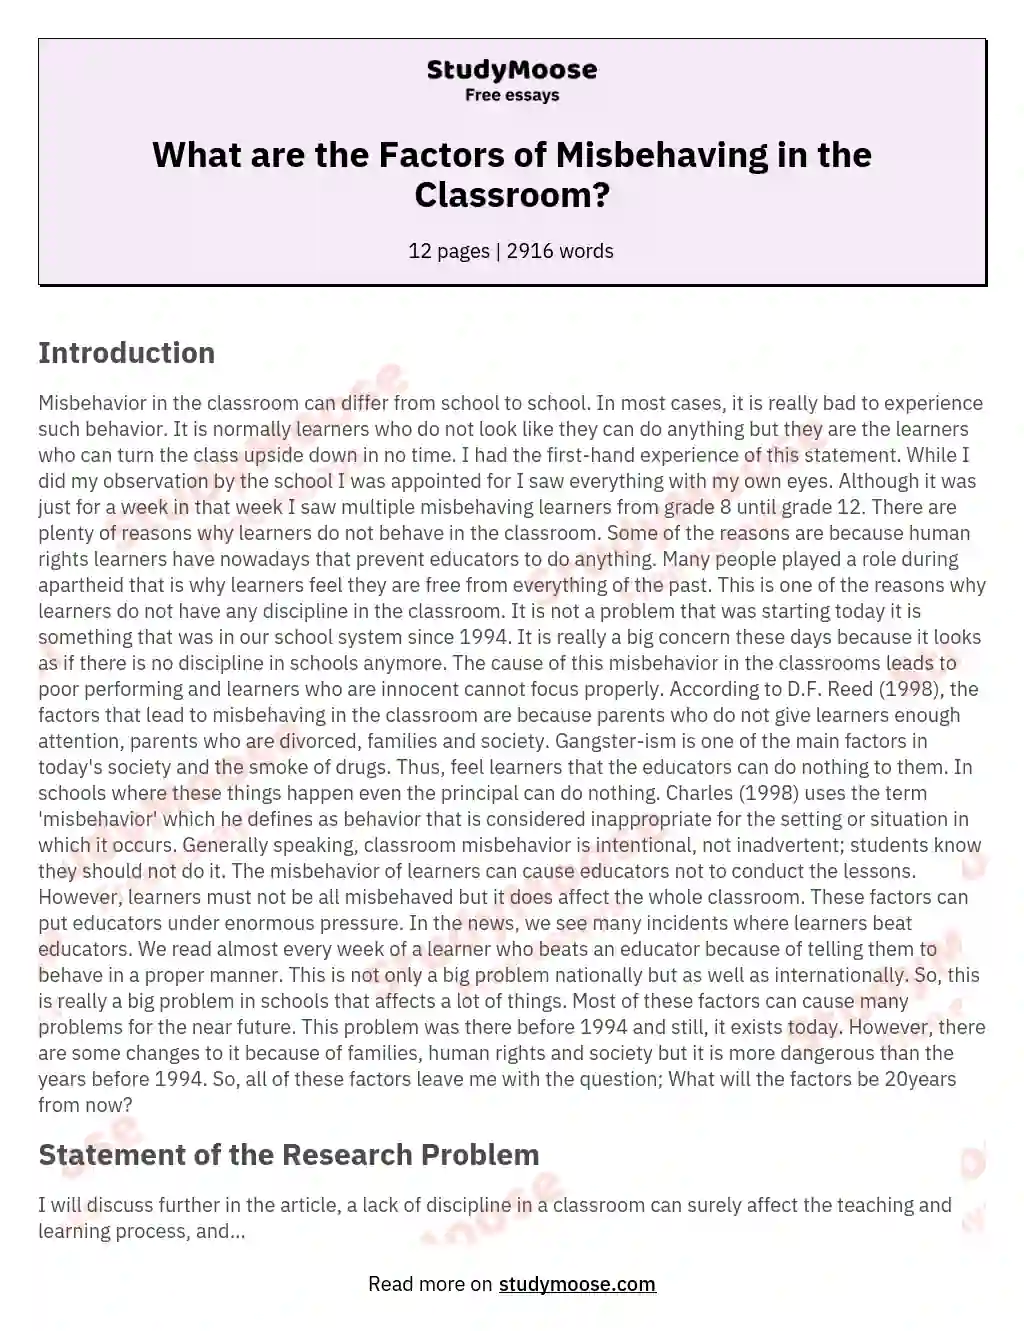 What are the Factors of Misbehaving in the Classroom? essay